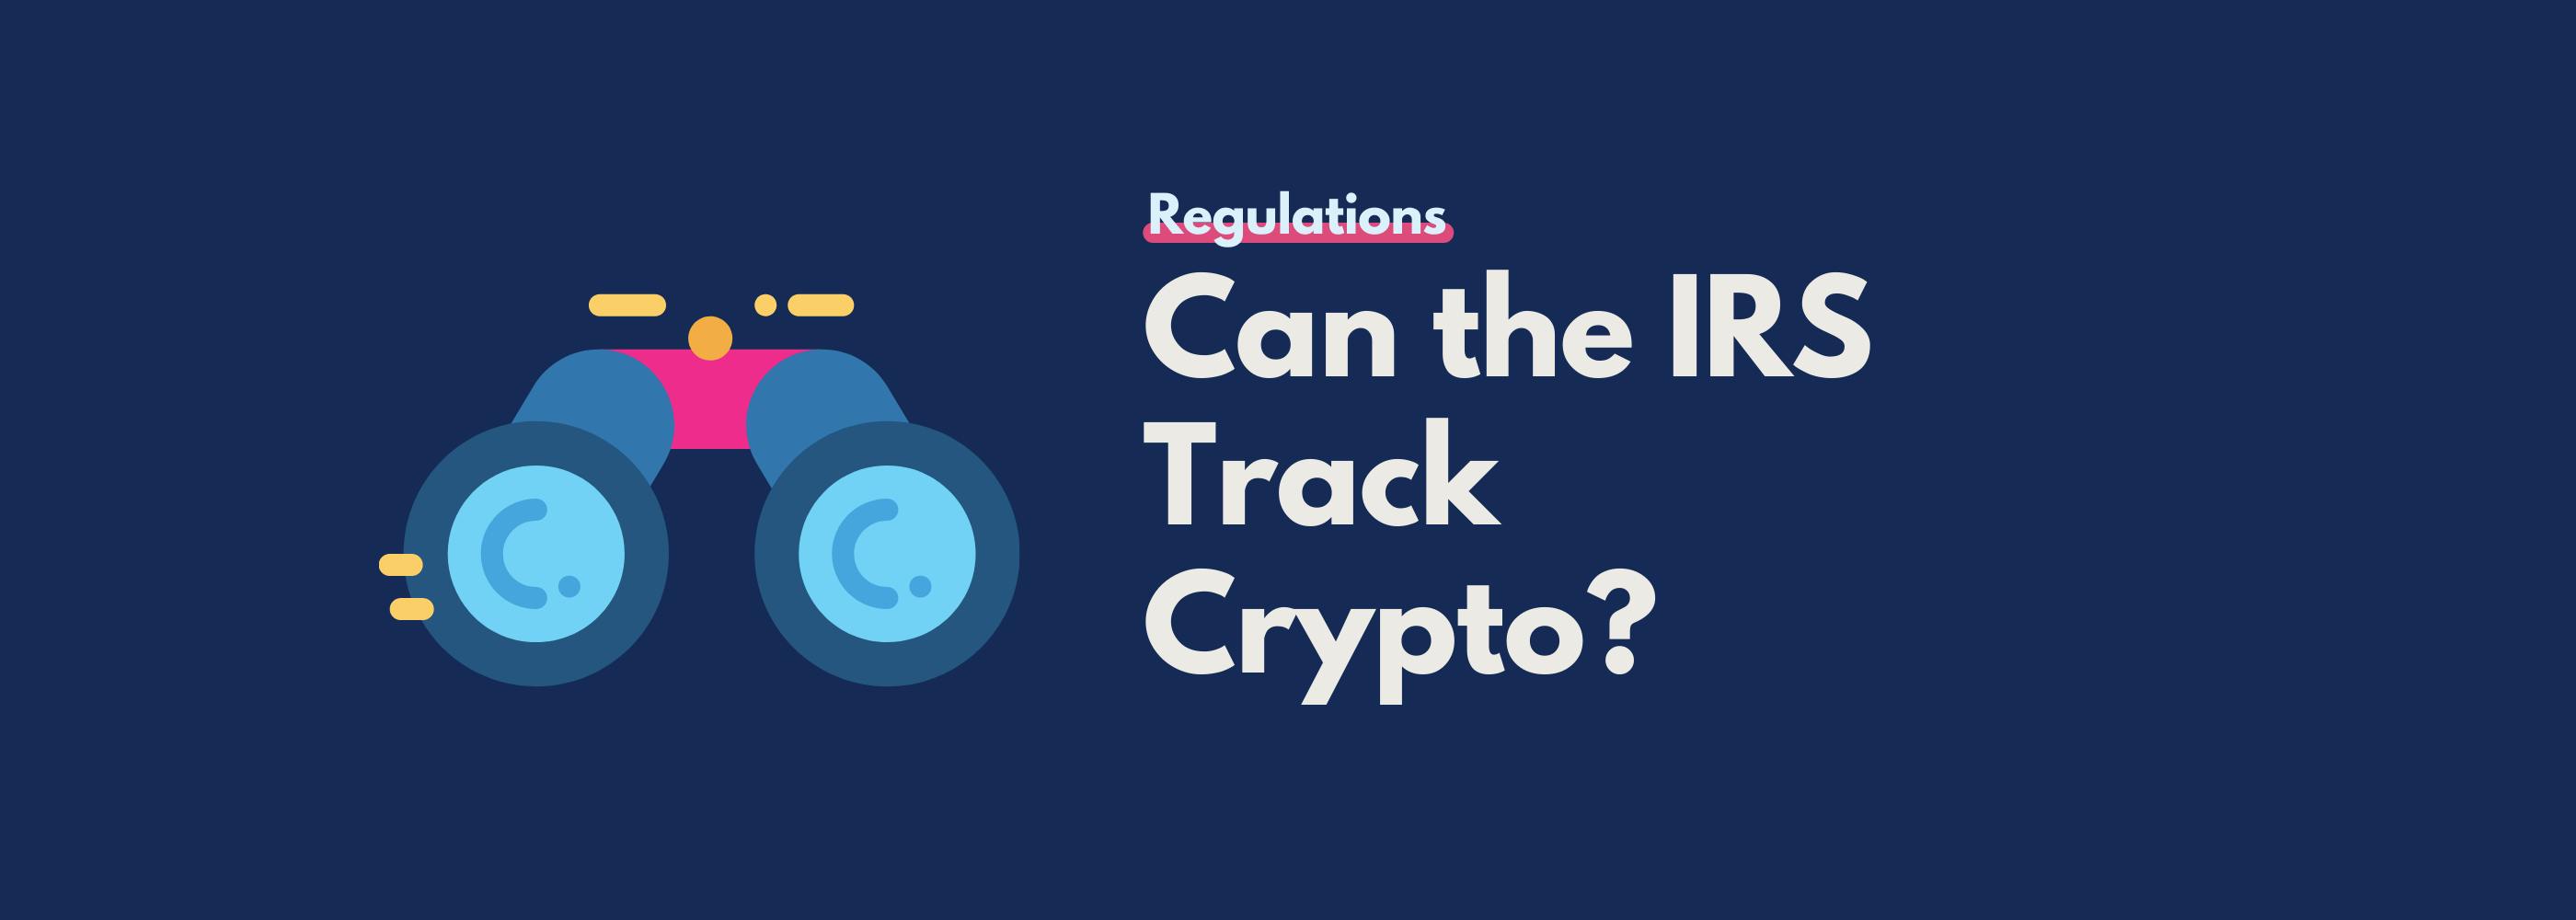 can the irs track bitcoin